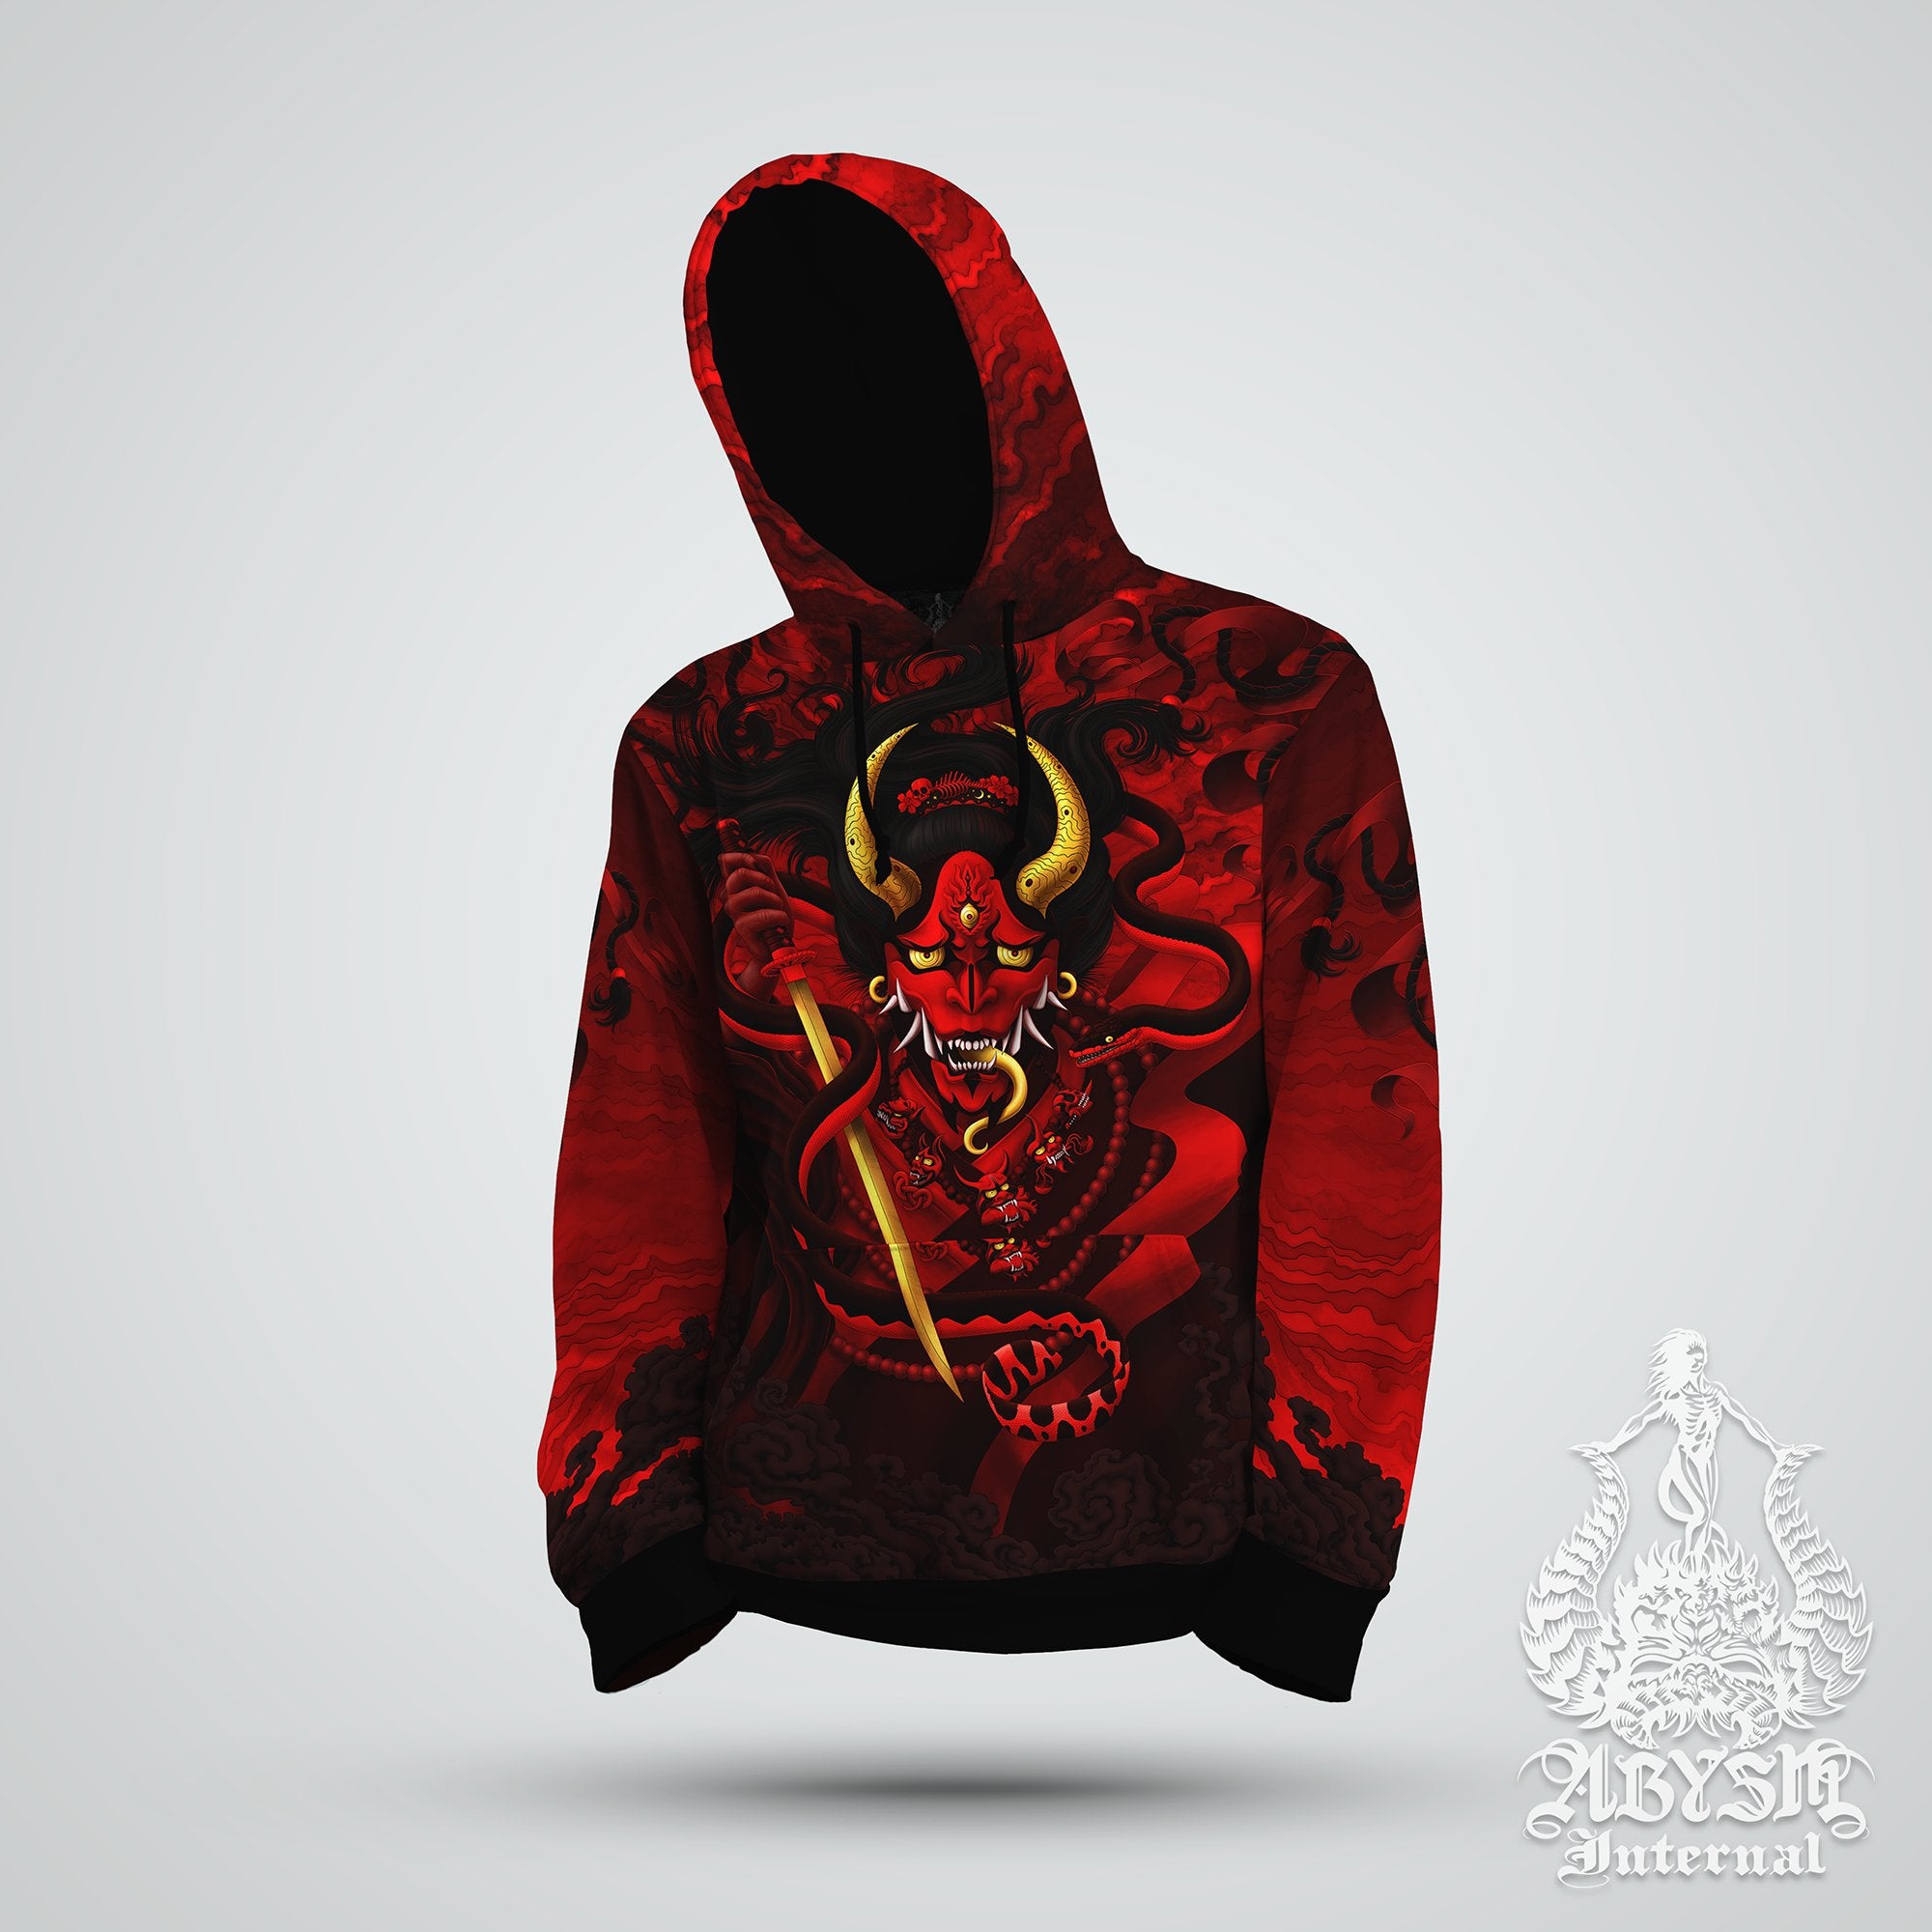 Skater Hoodie, Japanese Demon Sweater, Anime and Manga Streetwear, Bloody Gothic Street Outfit, Red and Black Hannya Pullover, Alternative Clothing, Unisex - Oni and Snake - Abysm Internal